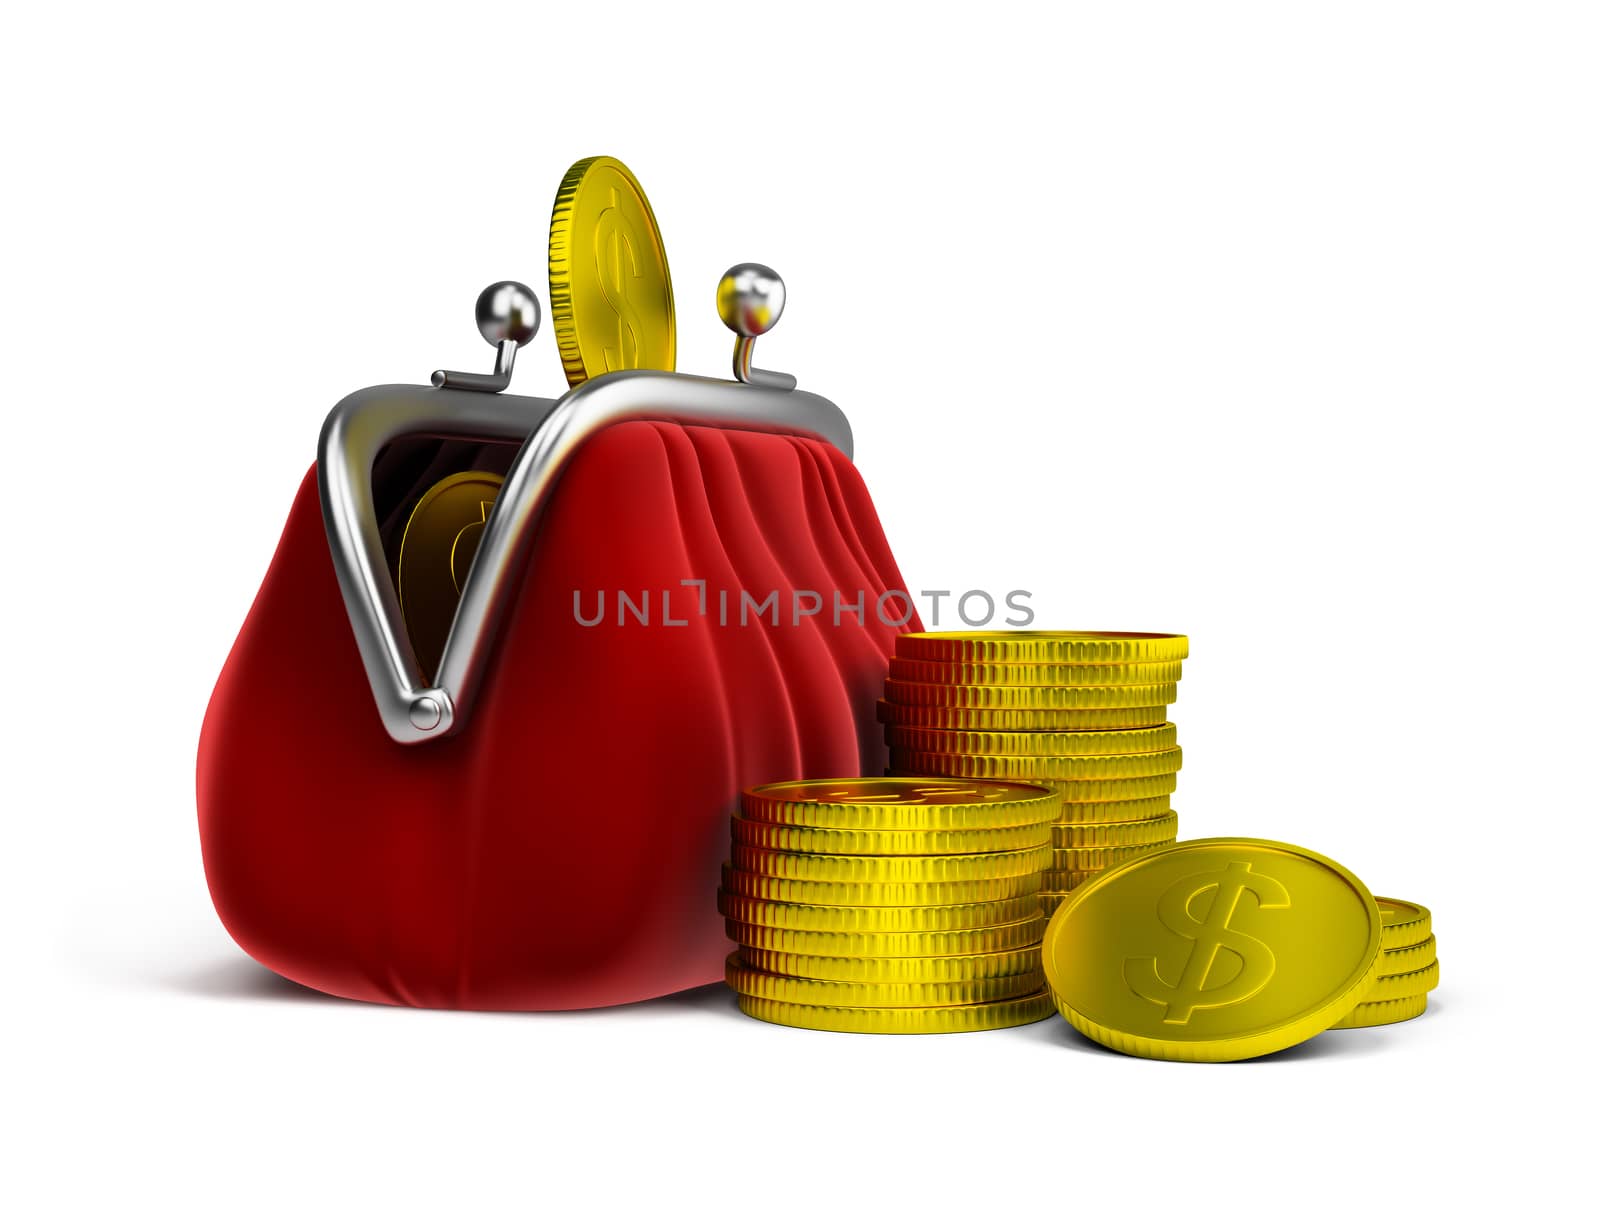 purse and coins by Anatoly